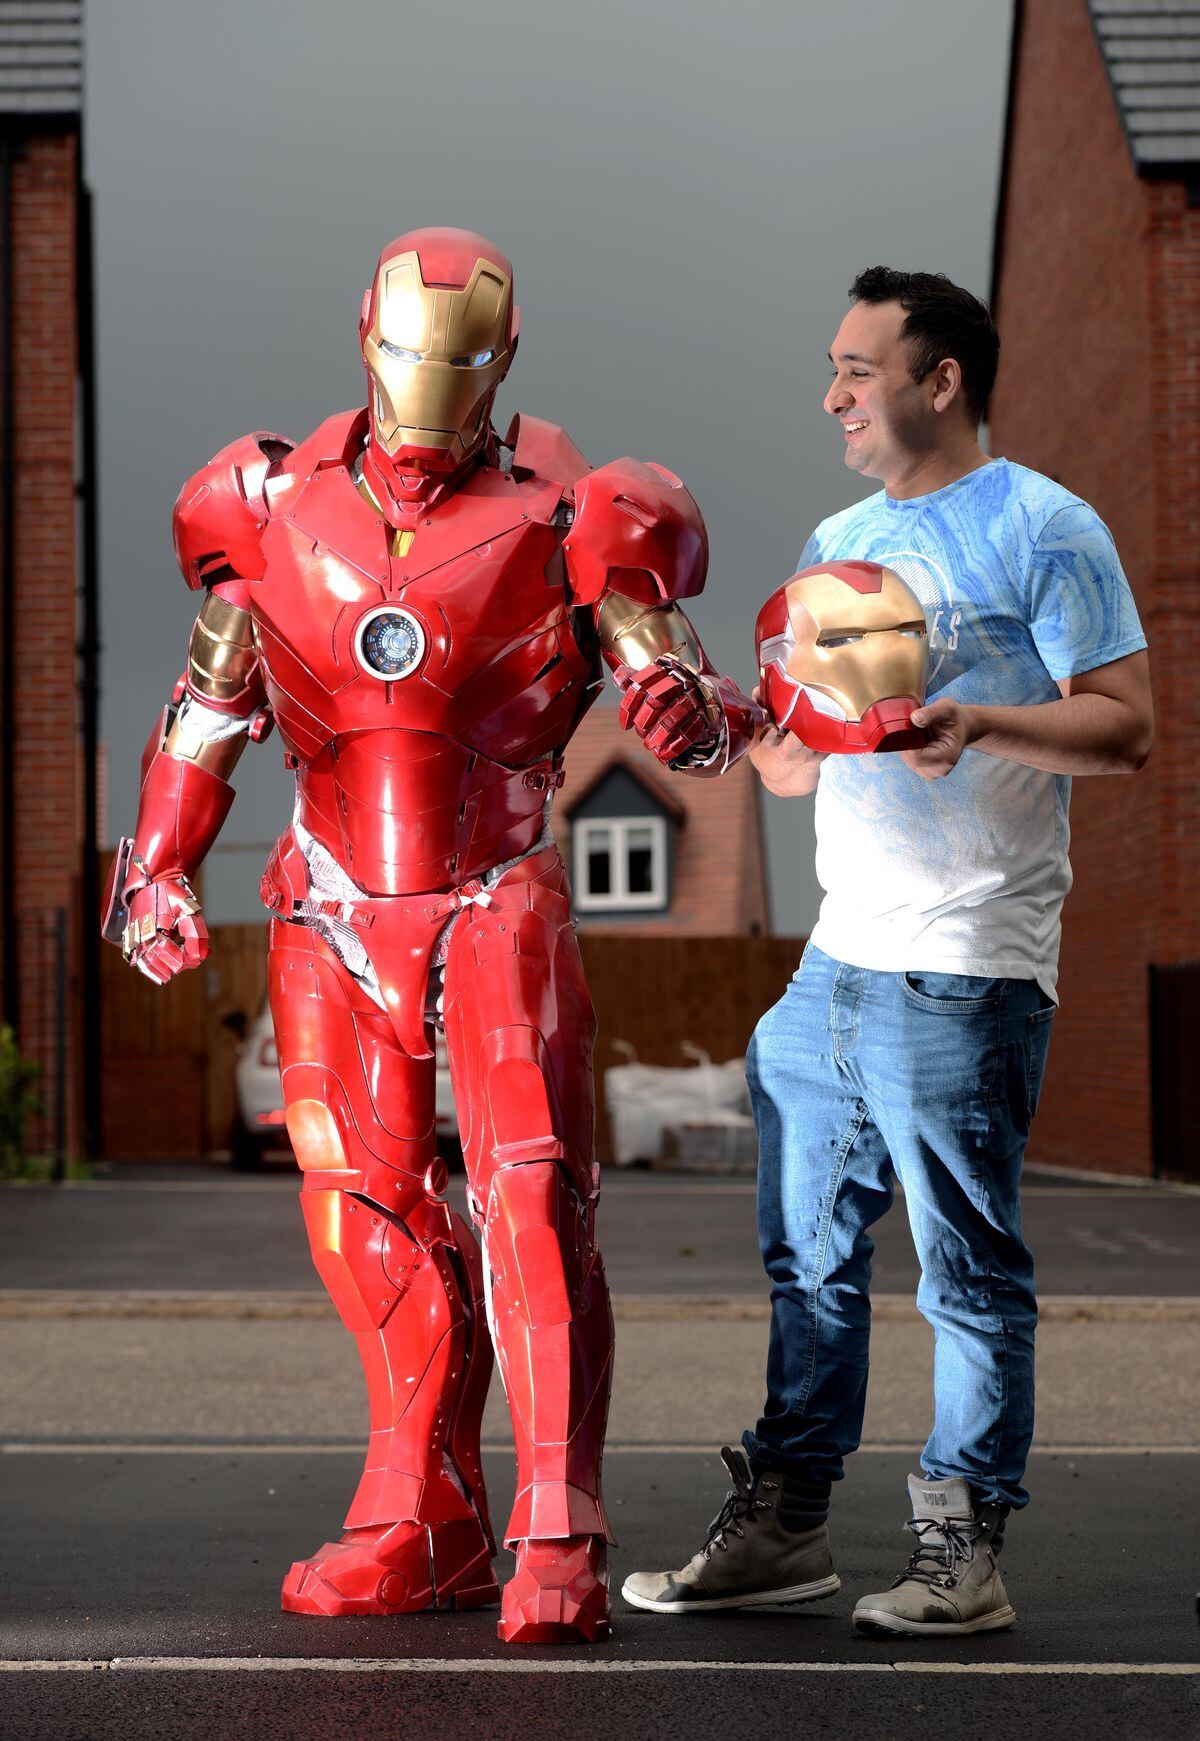 Adam Willoughby has 3D-printed an Iron Man suit. Wearing it is Jay Hinks